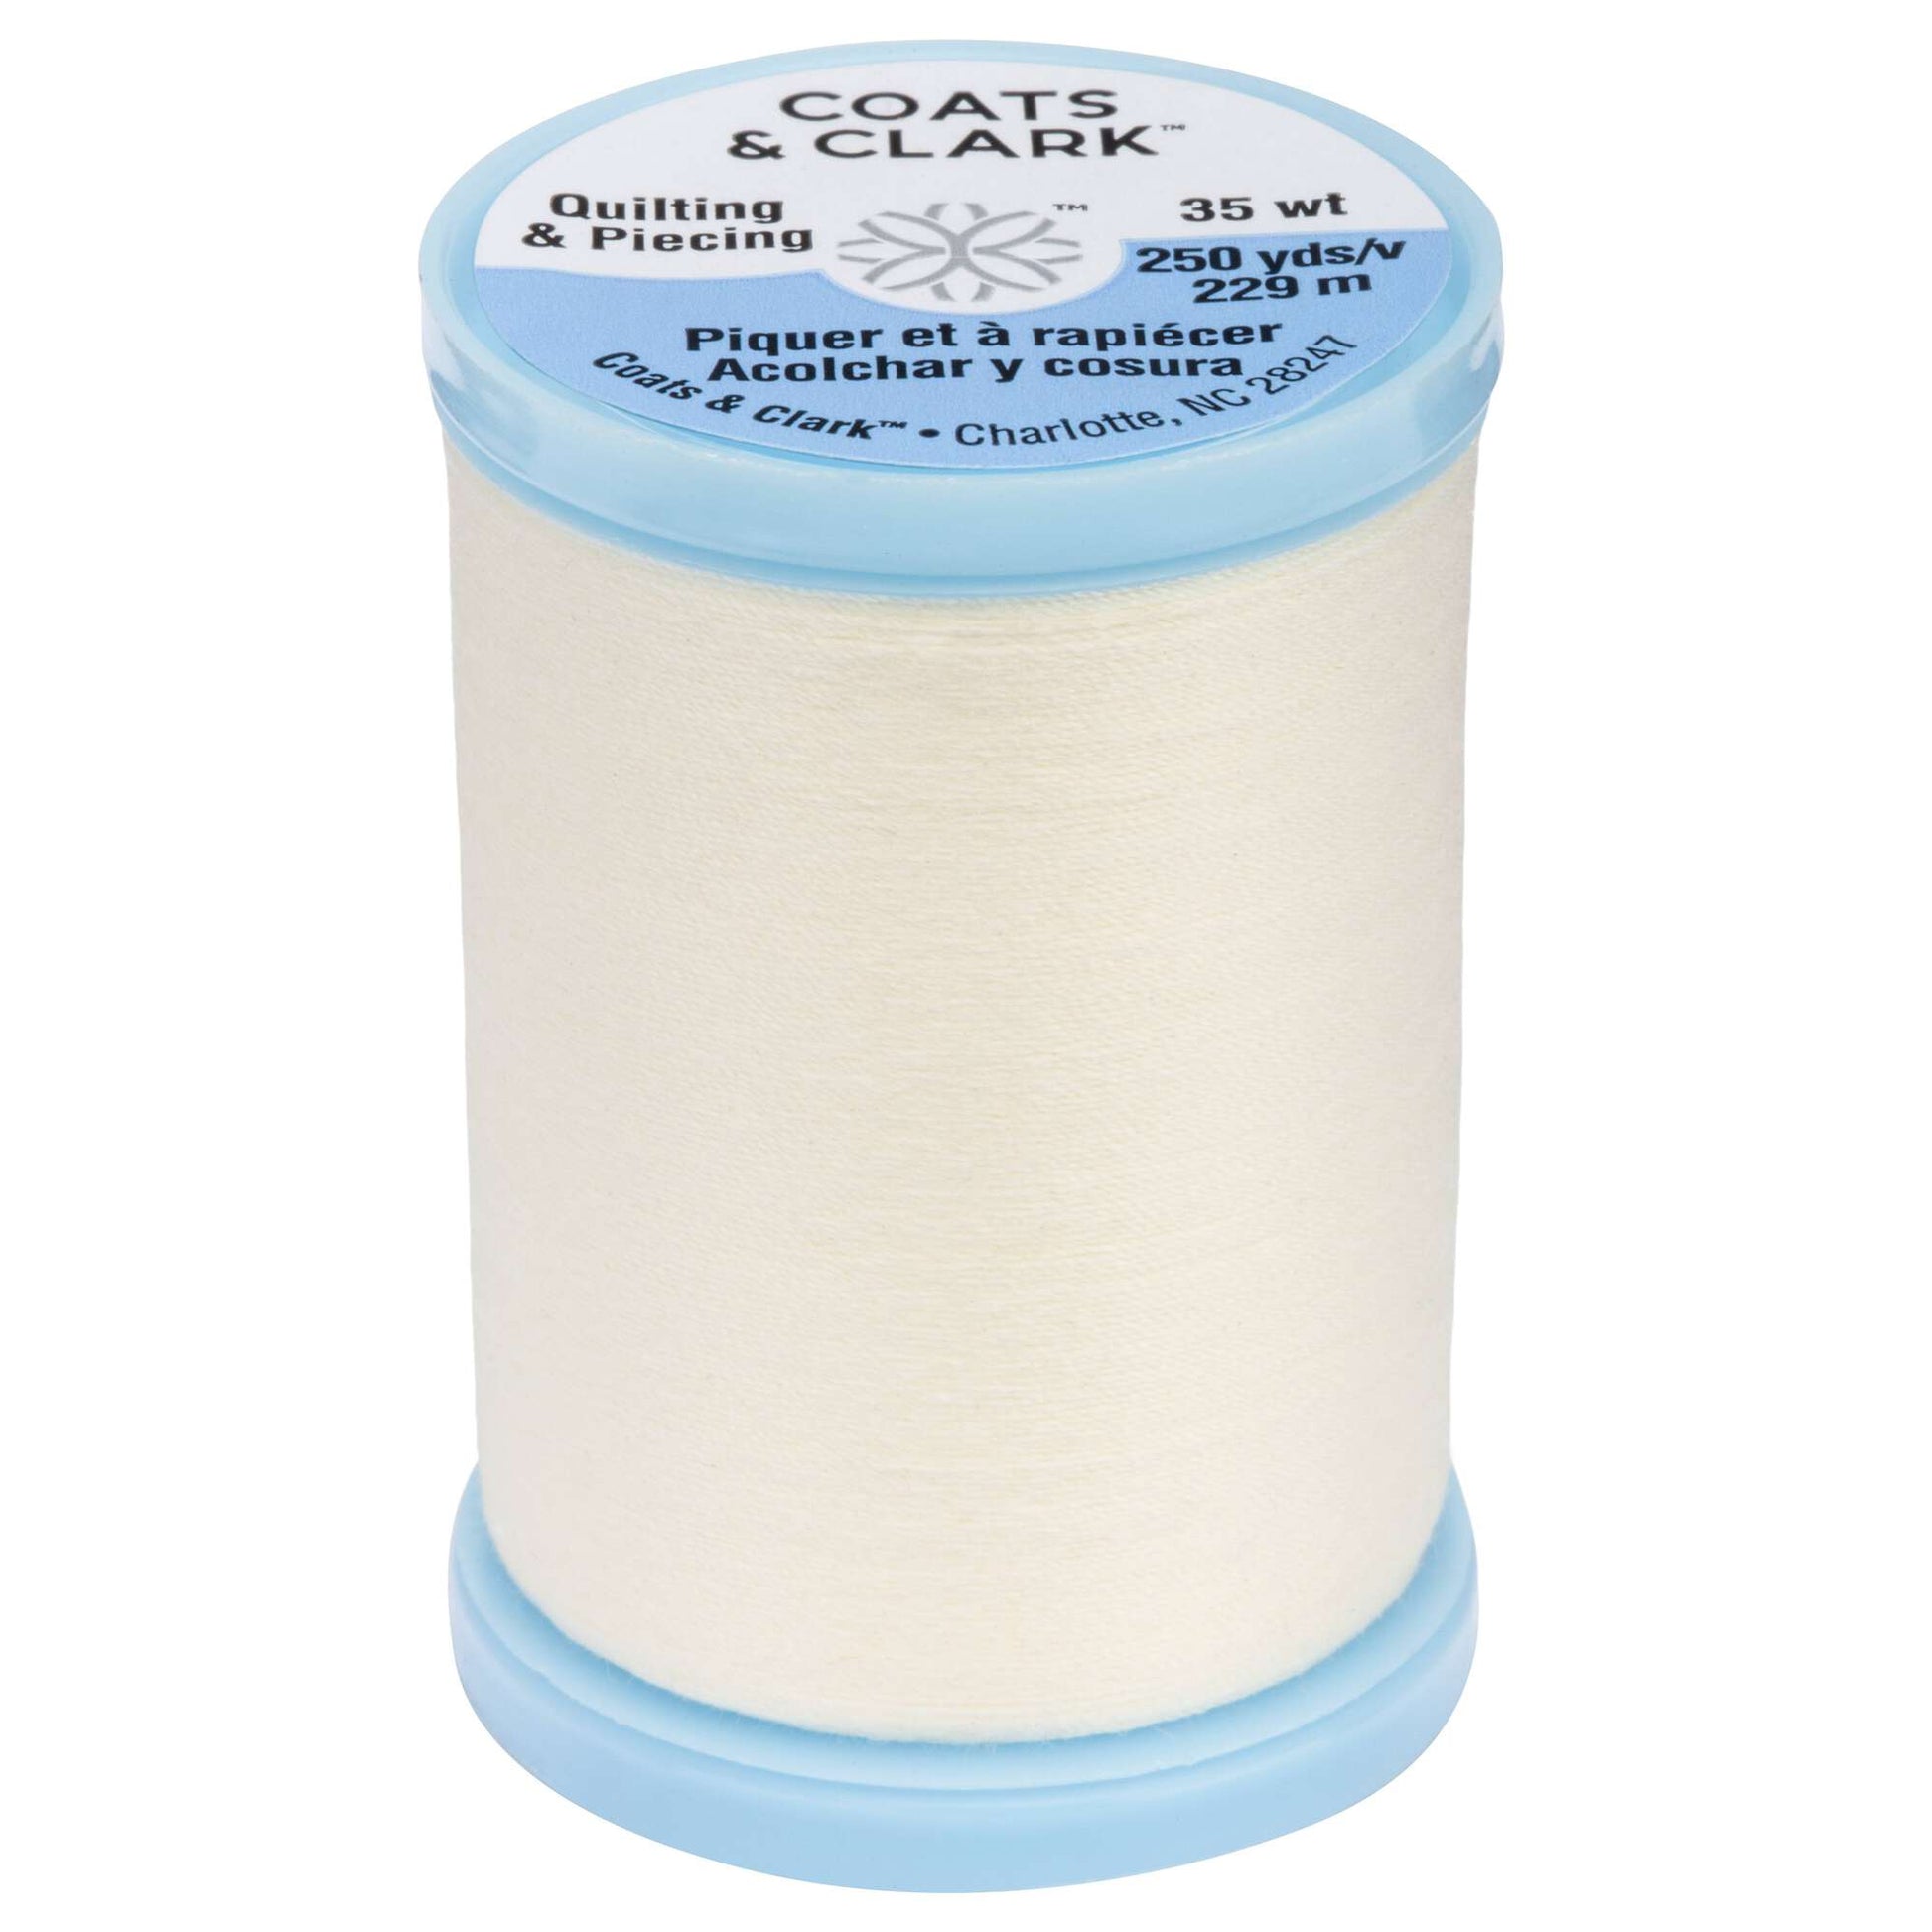 Coats & Clark Cotton Covered Quilting & Piecing Thread (250 Yards) Pearl